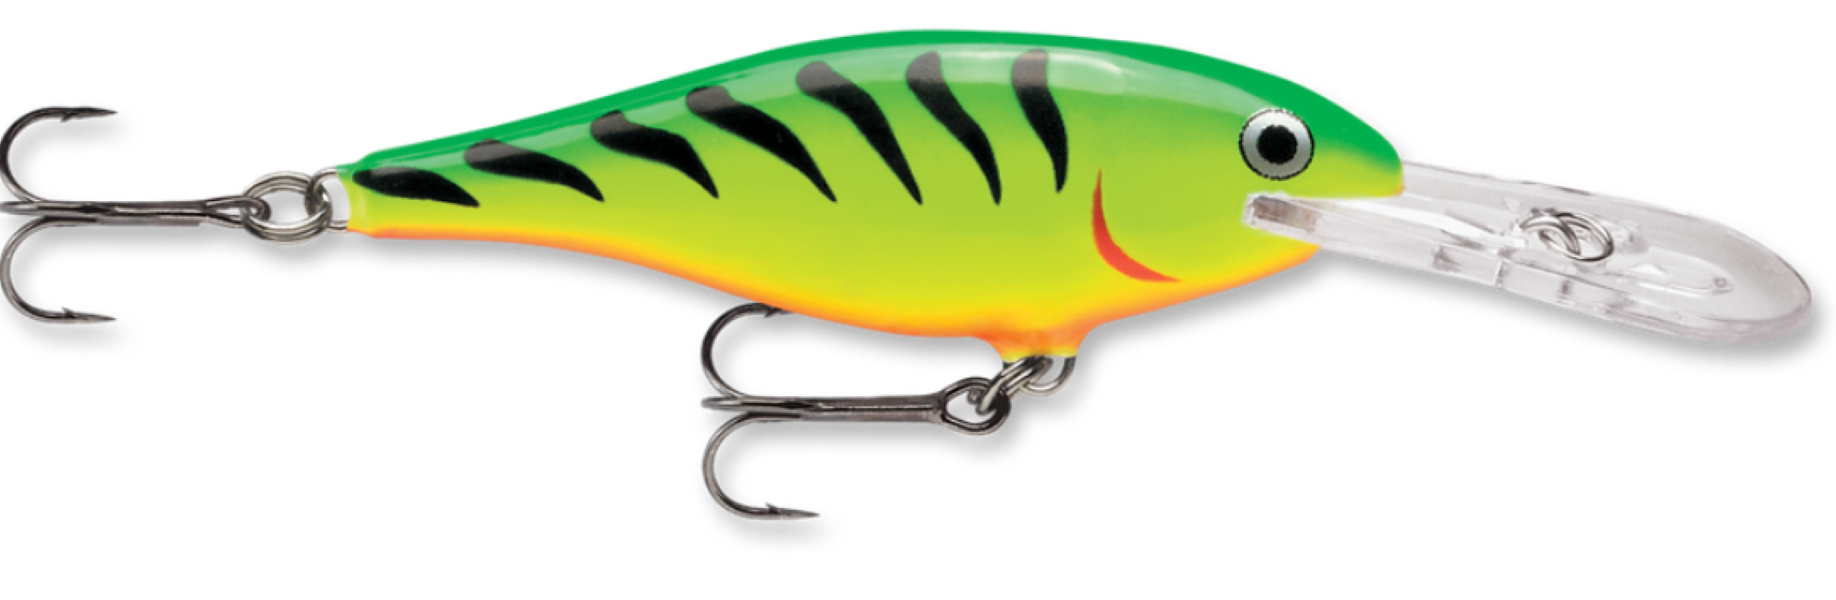 Rapala Jointed Shad Rap 07 Fishing Lure, 2.75-inch, Red Crawdad